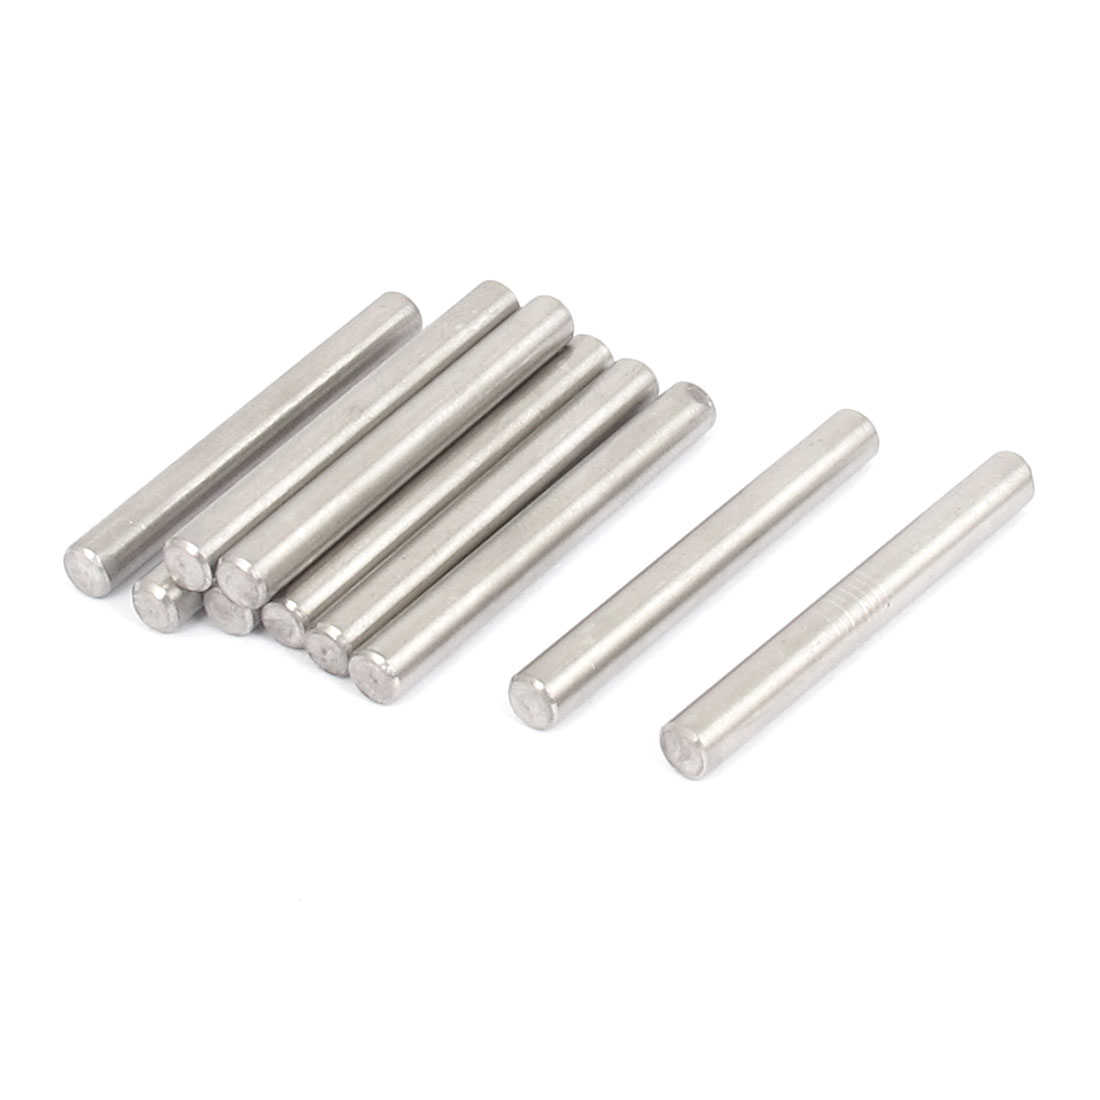 4mmx35mm 304 Stainless Steel Parallel Dowel Pins Fastener Elements 10pcs